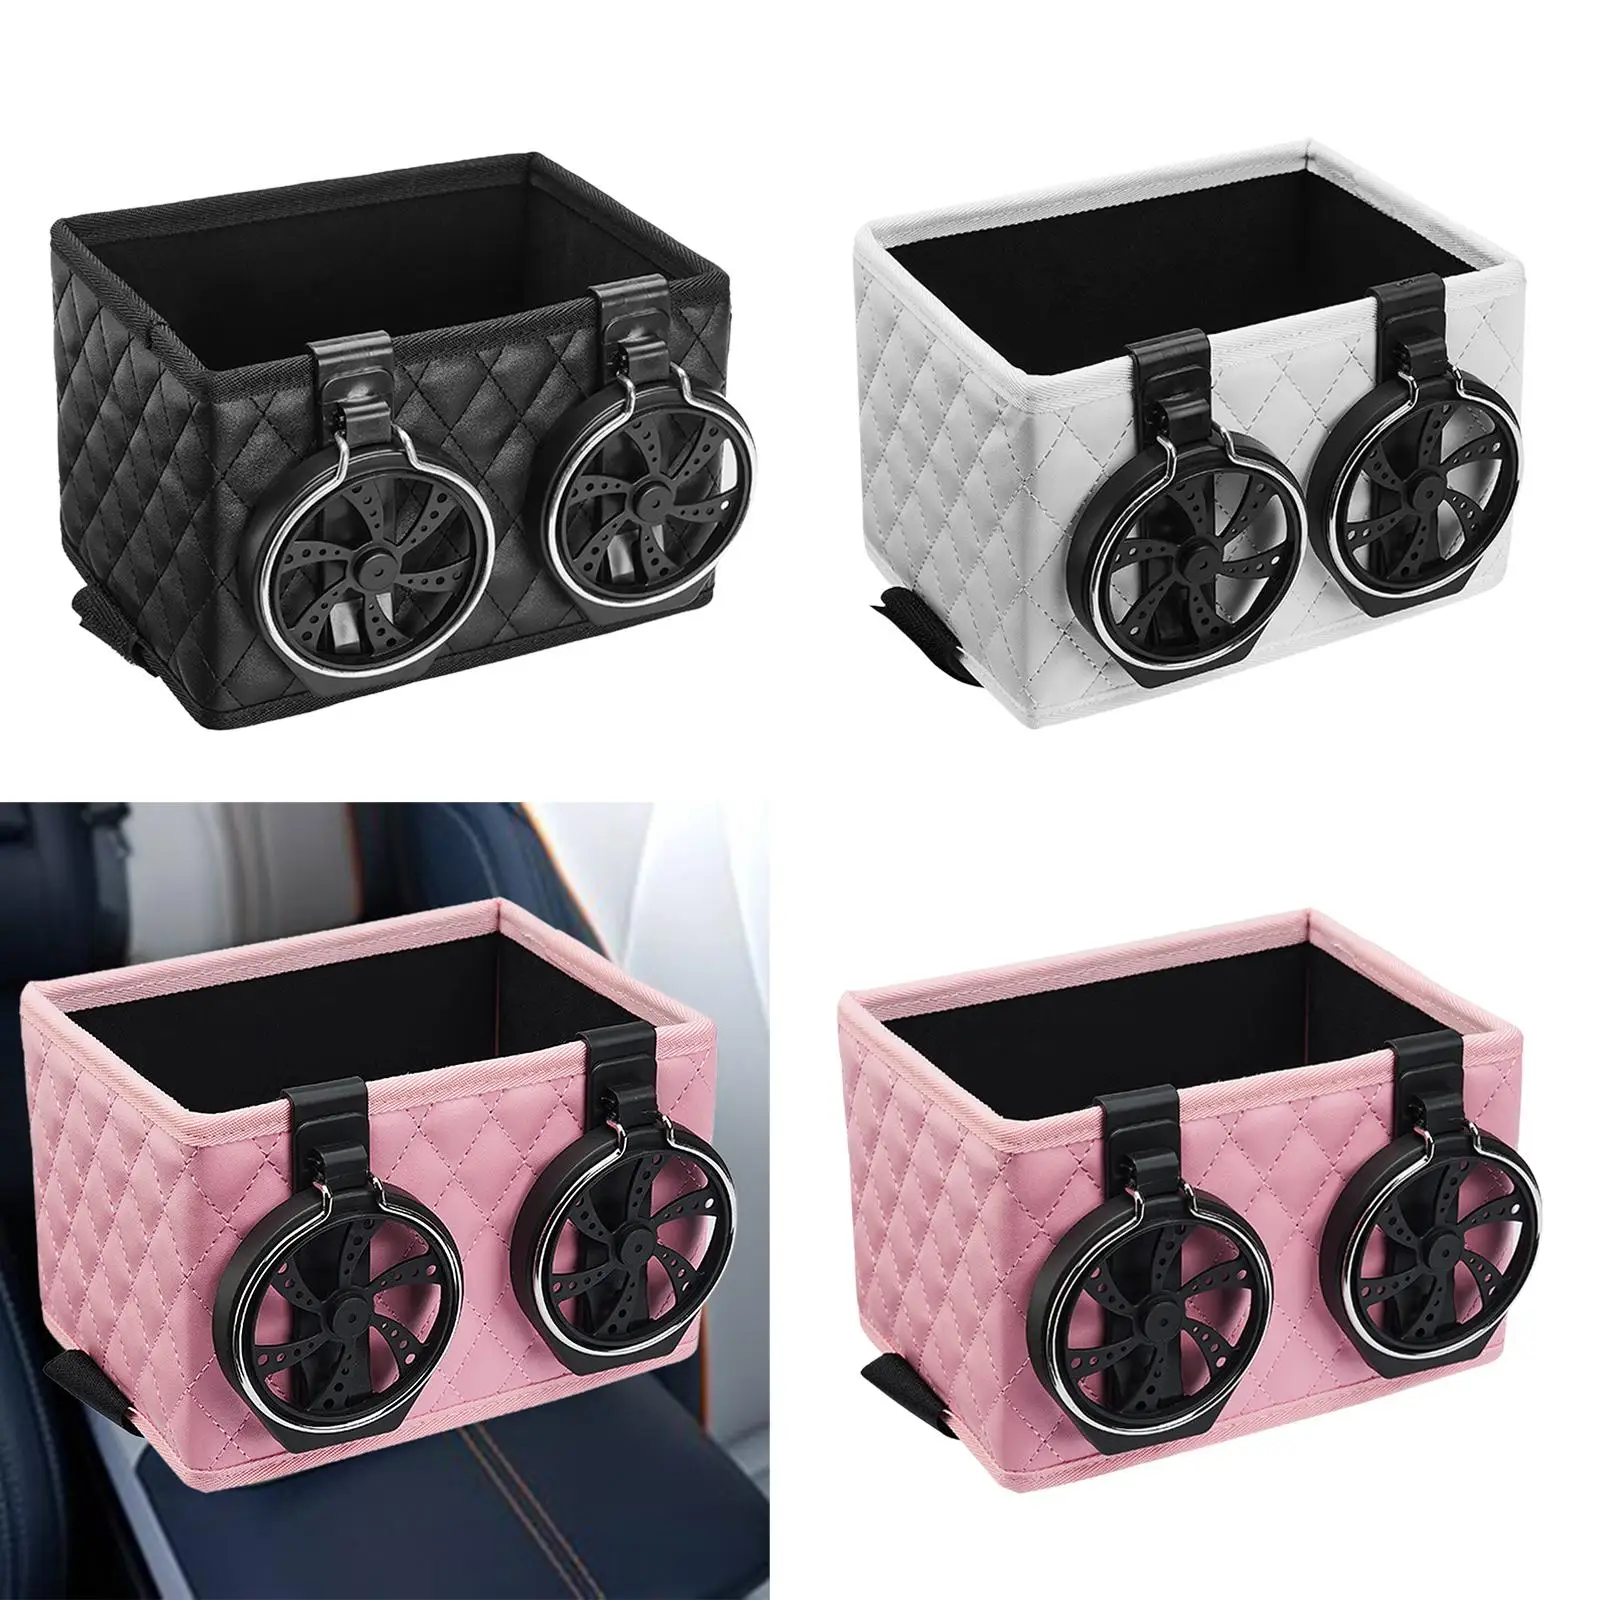 Universal Car Storage Box Multifunctional Car Console Side 2 in 1 Tissue box Cup Holder for Paper Towels Keys